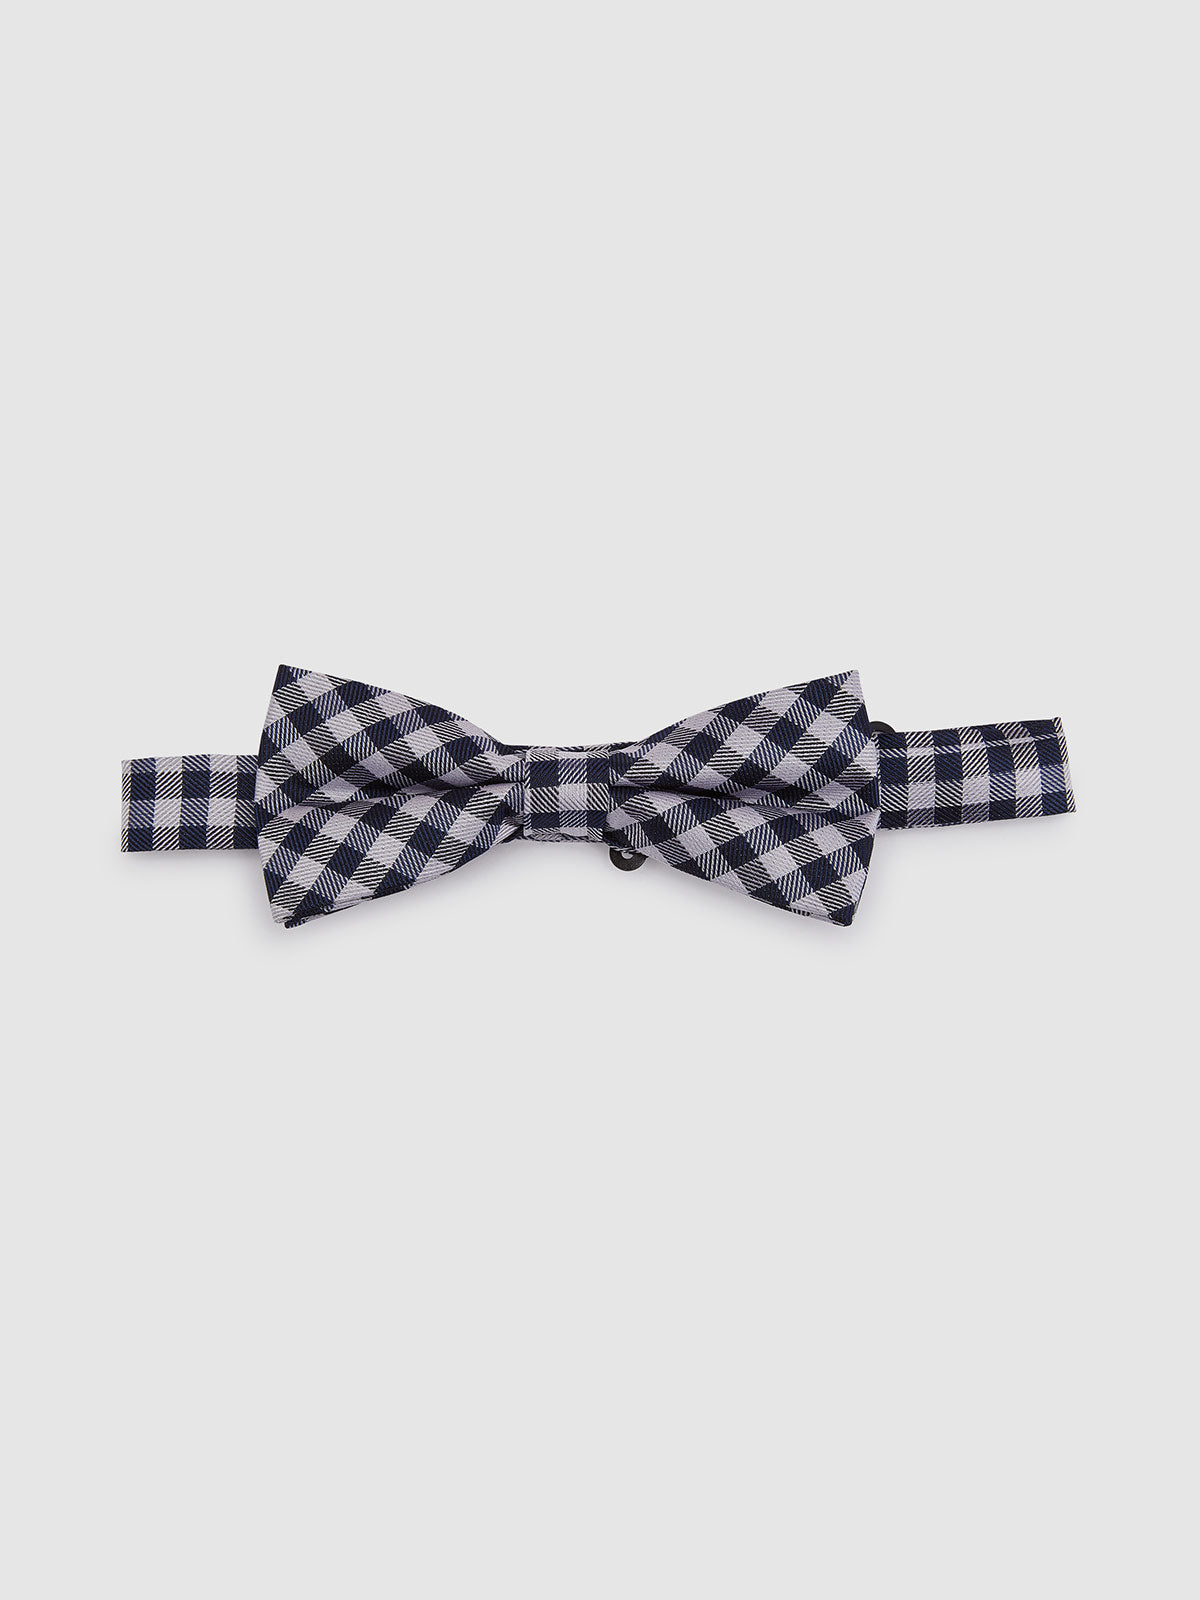 BOW TIE GINGHAM NAVY/SILVER